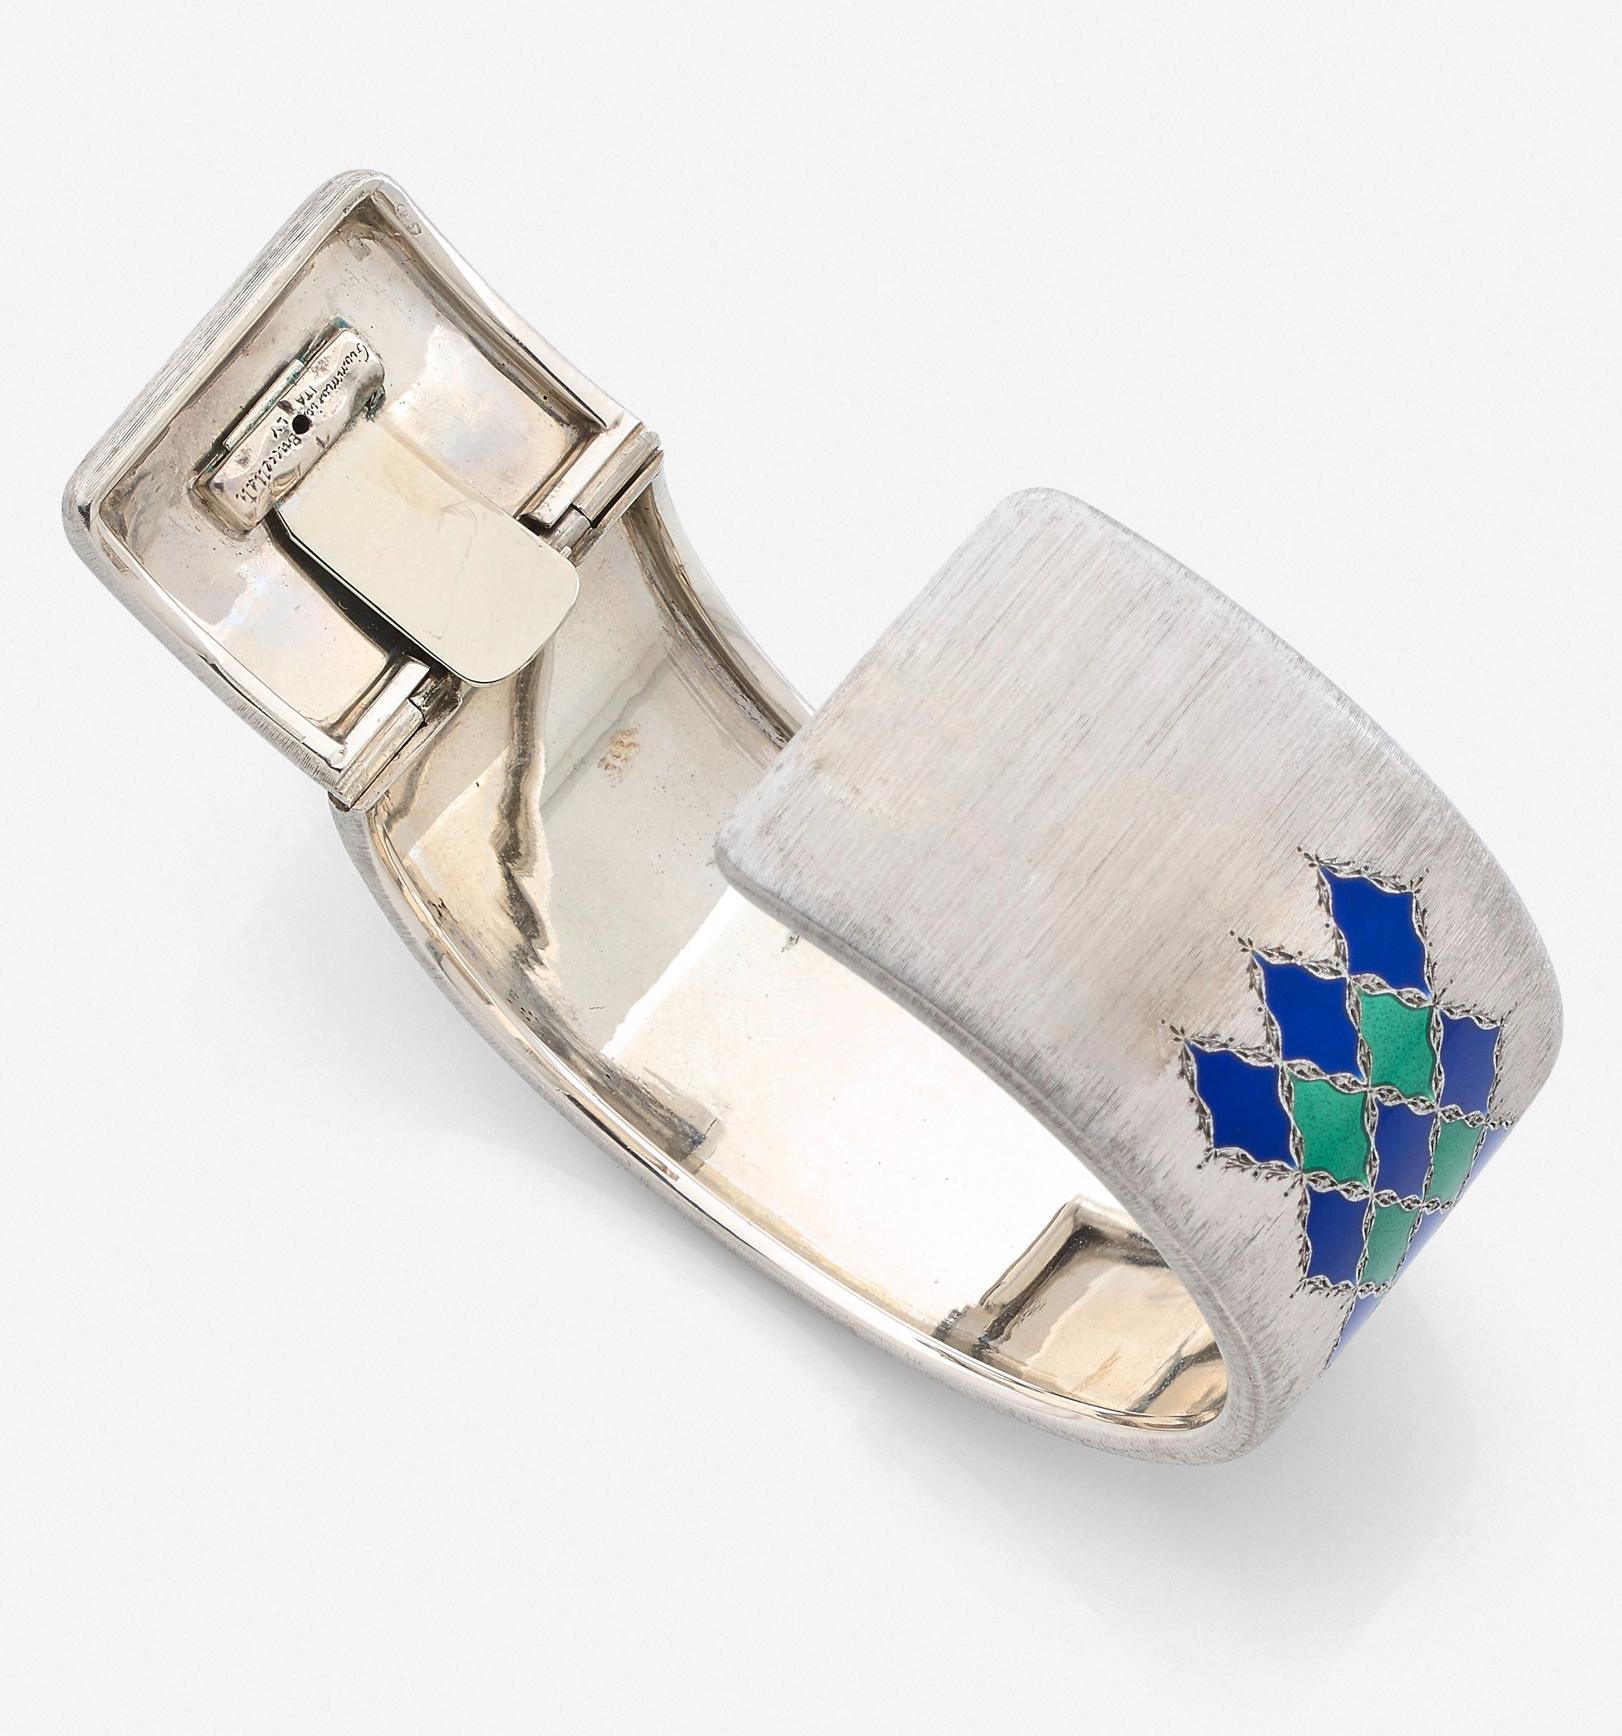 Buccellati, Gianmaria (1929-2015)
Rare Vintage finely chiseled Silver (Marked), with blue and green enamel diamond patterns, Manufactured C. 1970.
Signed Gianmaria Buccellati Italy, 
Inner Circumference : 18,5cm
In very good condition

Beautiful and